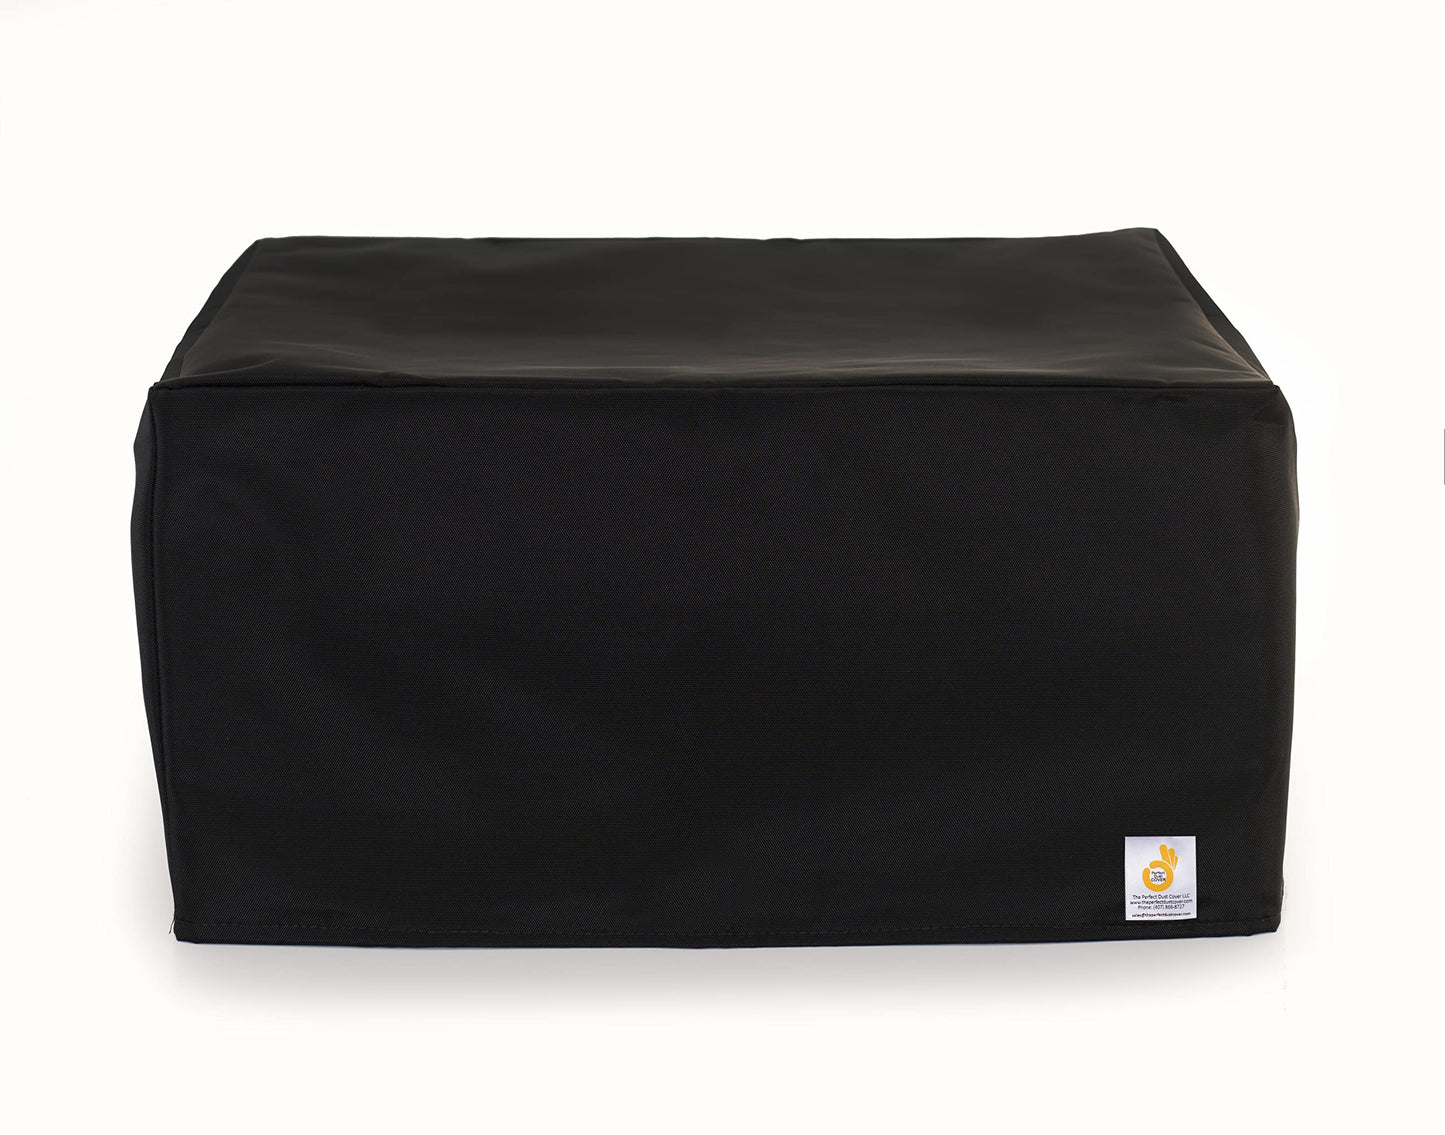 The Perfect Dust Cover, Black Nylon Cover for Canon Pixma TS5320 All-in-One Inkjet Printer, Anti Static Double Stitched and Waterproof Cover by The Perfect Dust Cover LLC